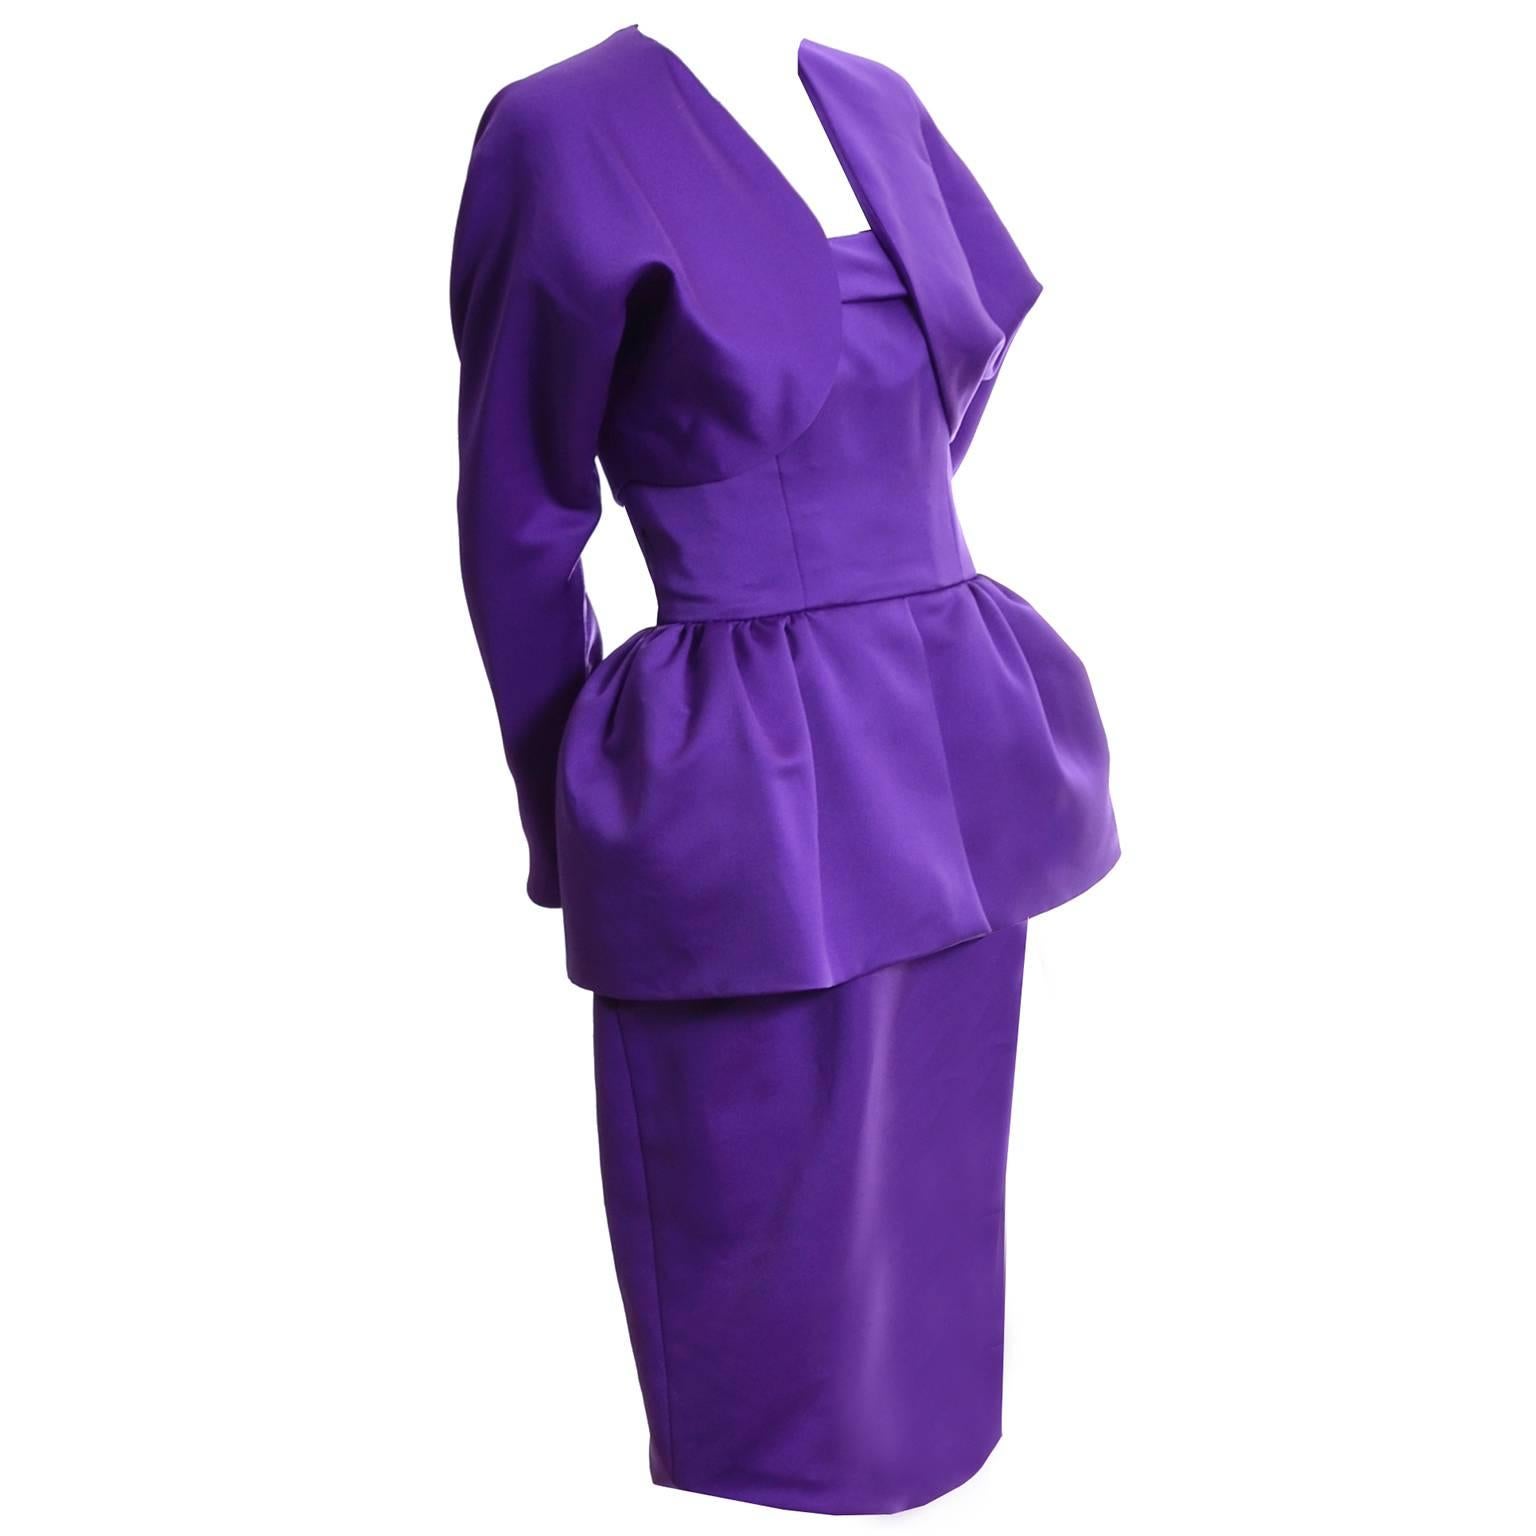 This rich purple satin Victor Costa vintage strapless dress has a tulle lined peplum and separate bolero jacket. The dress has a back zipper and the bolero has long sleeves and is just perfect for cooler evenings!  This 2 piece outfit is in